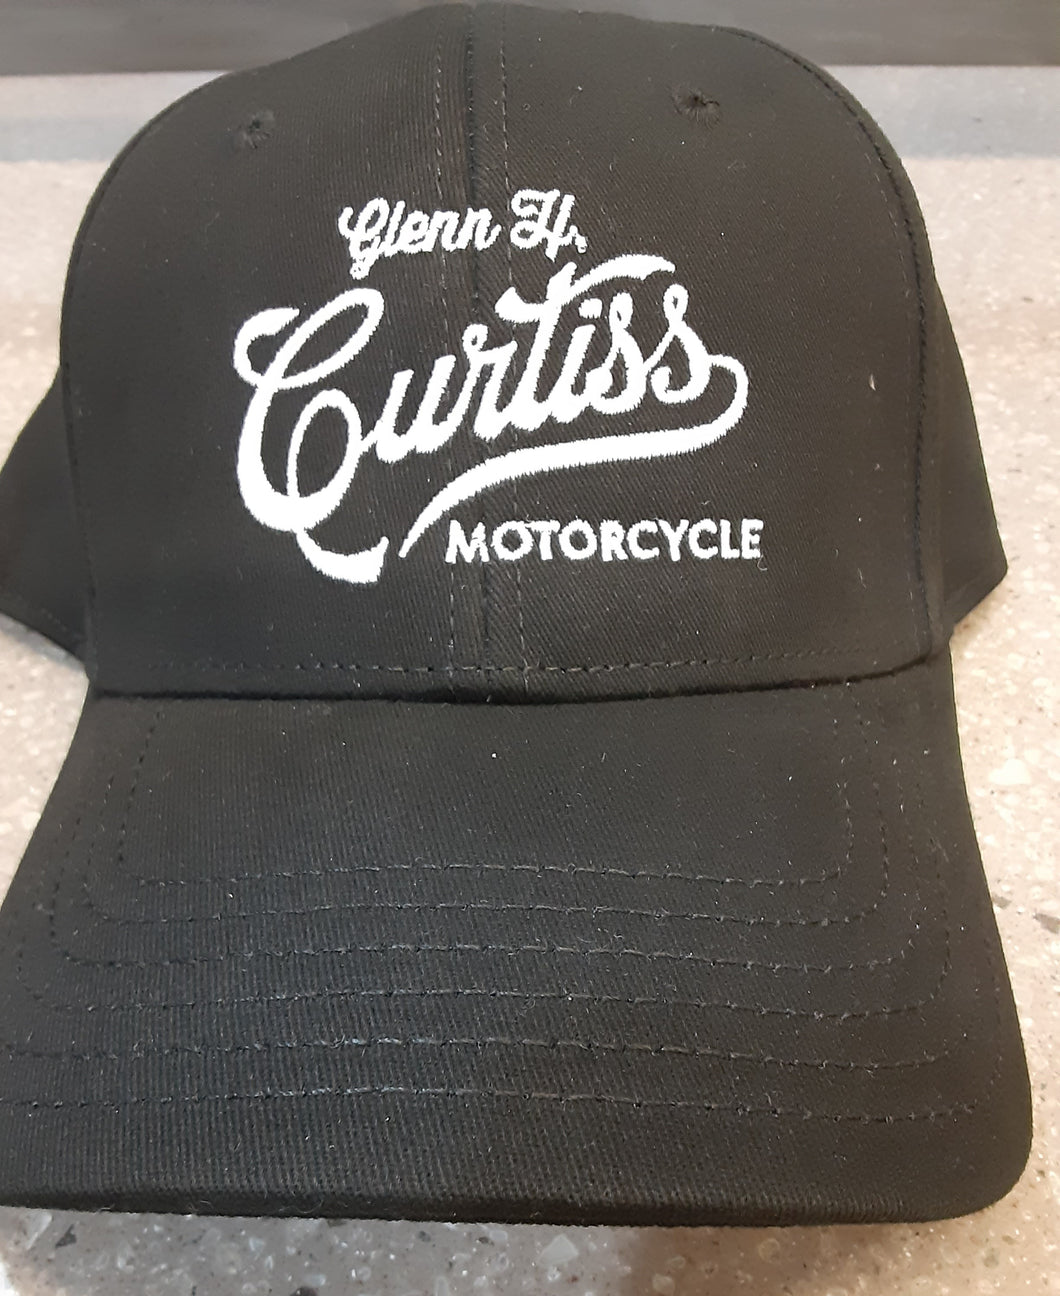 Curtiss Motorcycle Embroidered Hat